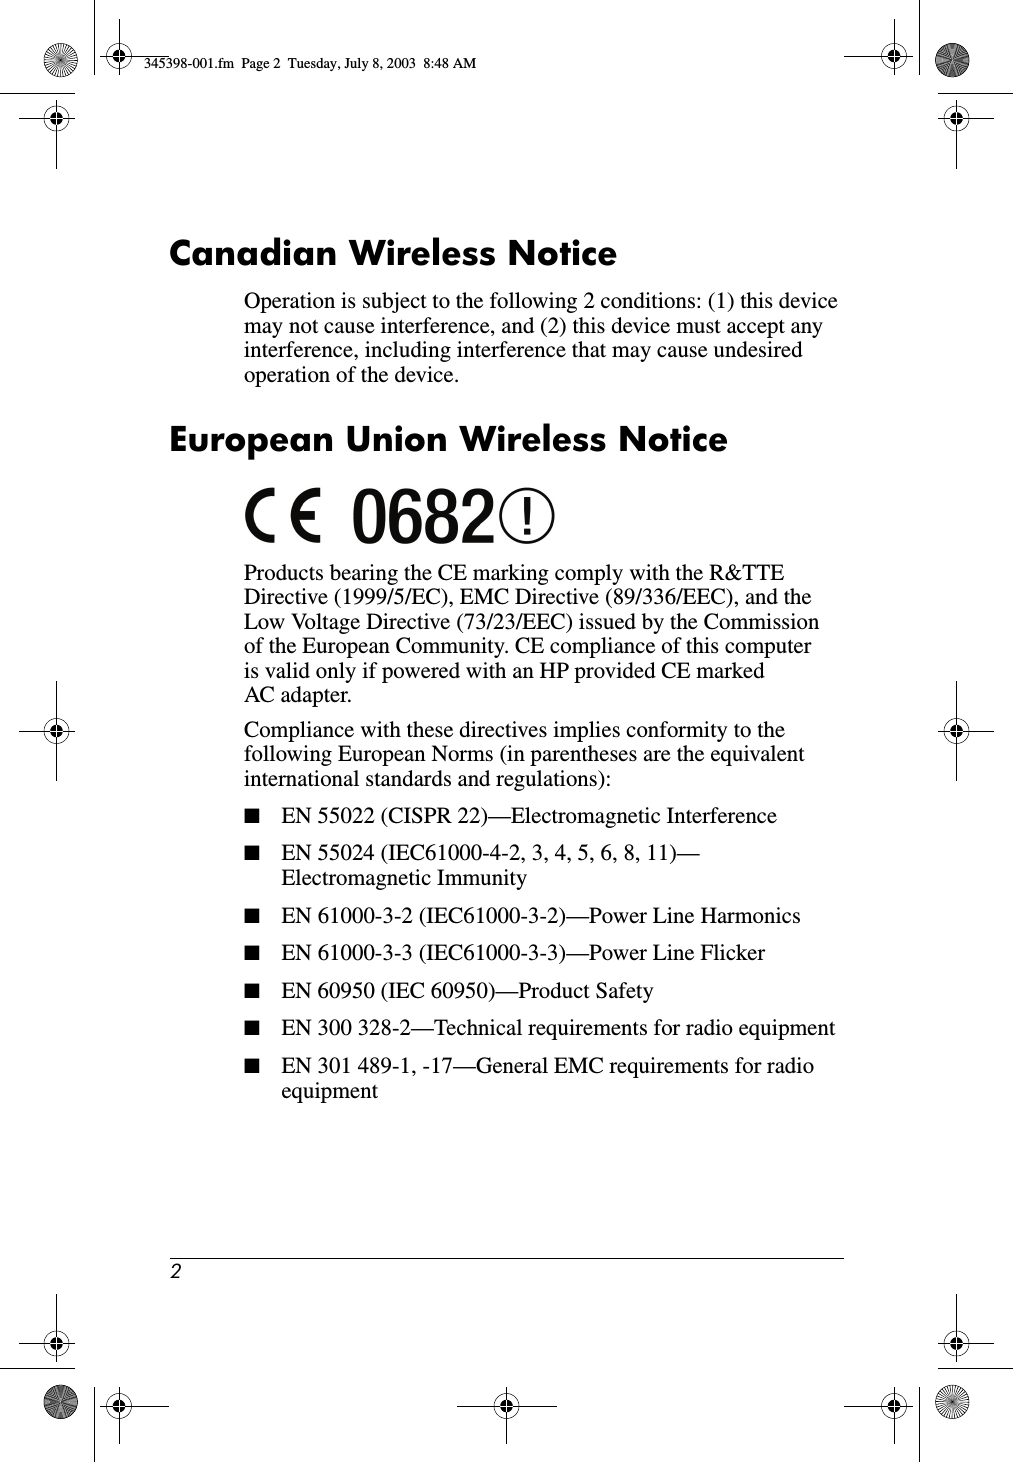 2Canadian Wireless NoticeOperation is subject to the following 2 conditions: (1) this device may not cause interference, and (2) this device must accept any interference, including interference that may cause undesired operation of the device.European Union Wireless NoticeProducts bearing the CE marking comply with the R&amp;TTE Directive (1999/5/EC), EMC Directive (89/336/EEC), and the Low Voltage Directive (73/23/EEC) issued by the Commission of the European Community. CE compliance of this computer is valid only if powered with an HP provided CE marked AC adapter.Compliance with these directives implies conformity to the following European Norms (in parentheses are the equivalent international standards and regulations):■EN 55022 (CISPR 22)—Electromagnetic Interference■EN 55024 (IEC61000-4-2, 3, 4, 5, 6, 8, 11)— Electromagnetic Immunity■EN 61000-3-2 (IEC61000-3-2)—Power Line Harmonics■EN 61000-3-3 (IEC61000-3-3)—Power Line Flicker■EN 60950 (IEC 60950)—Product Safety■EN 300 328-2—Technical requirements for radio equipment■EN 301 489-1, -17—General EMC requirements for radio equipment345398-001.fm  Page 2  Tuesday, July 8, 2003  8:48 AM